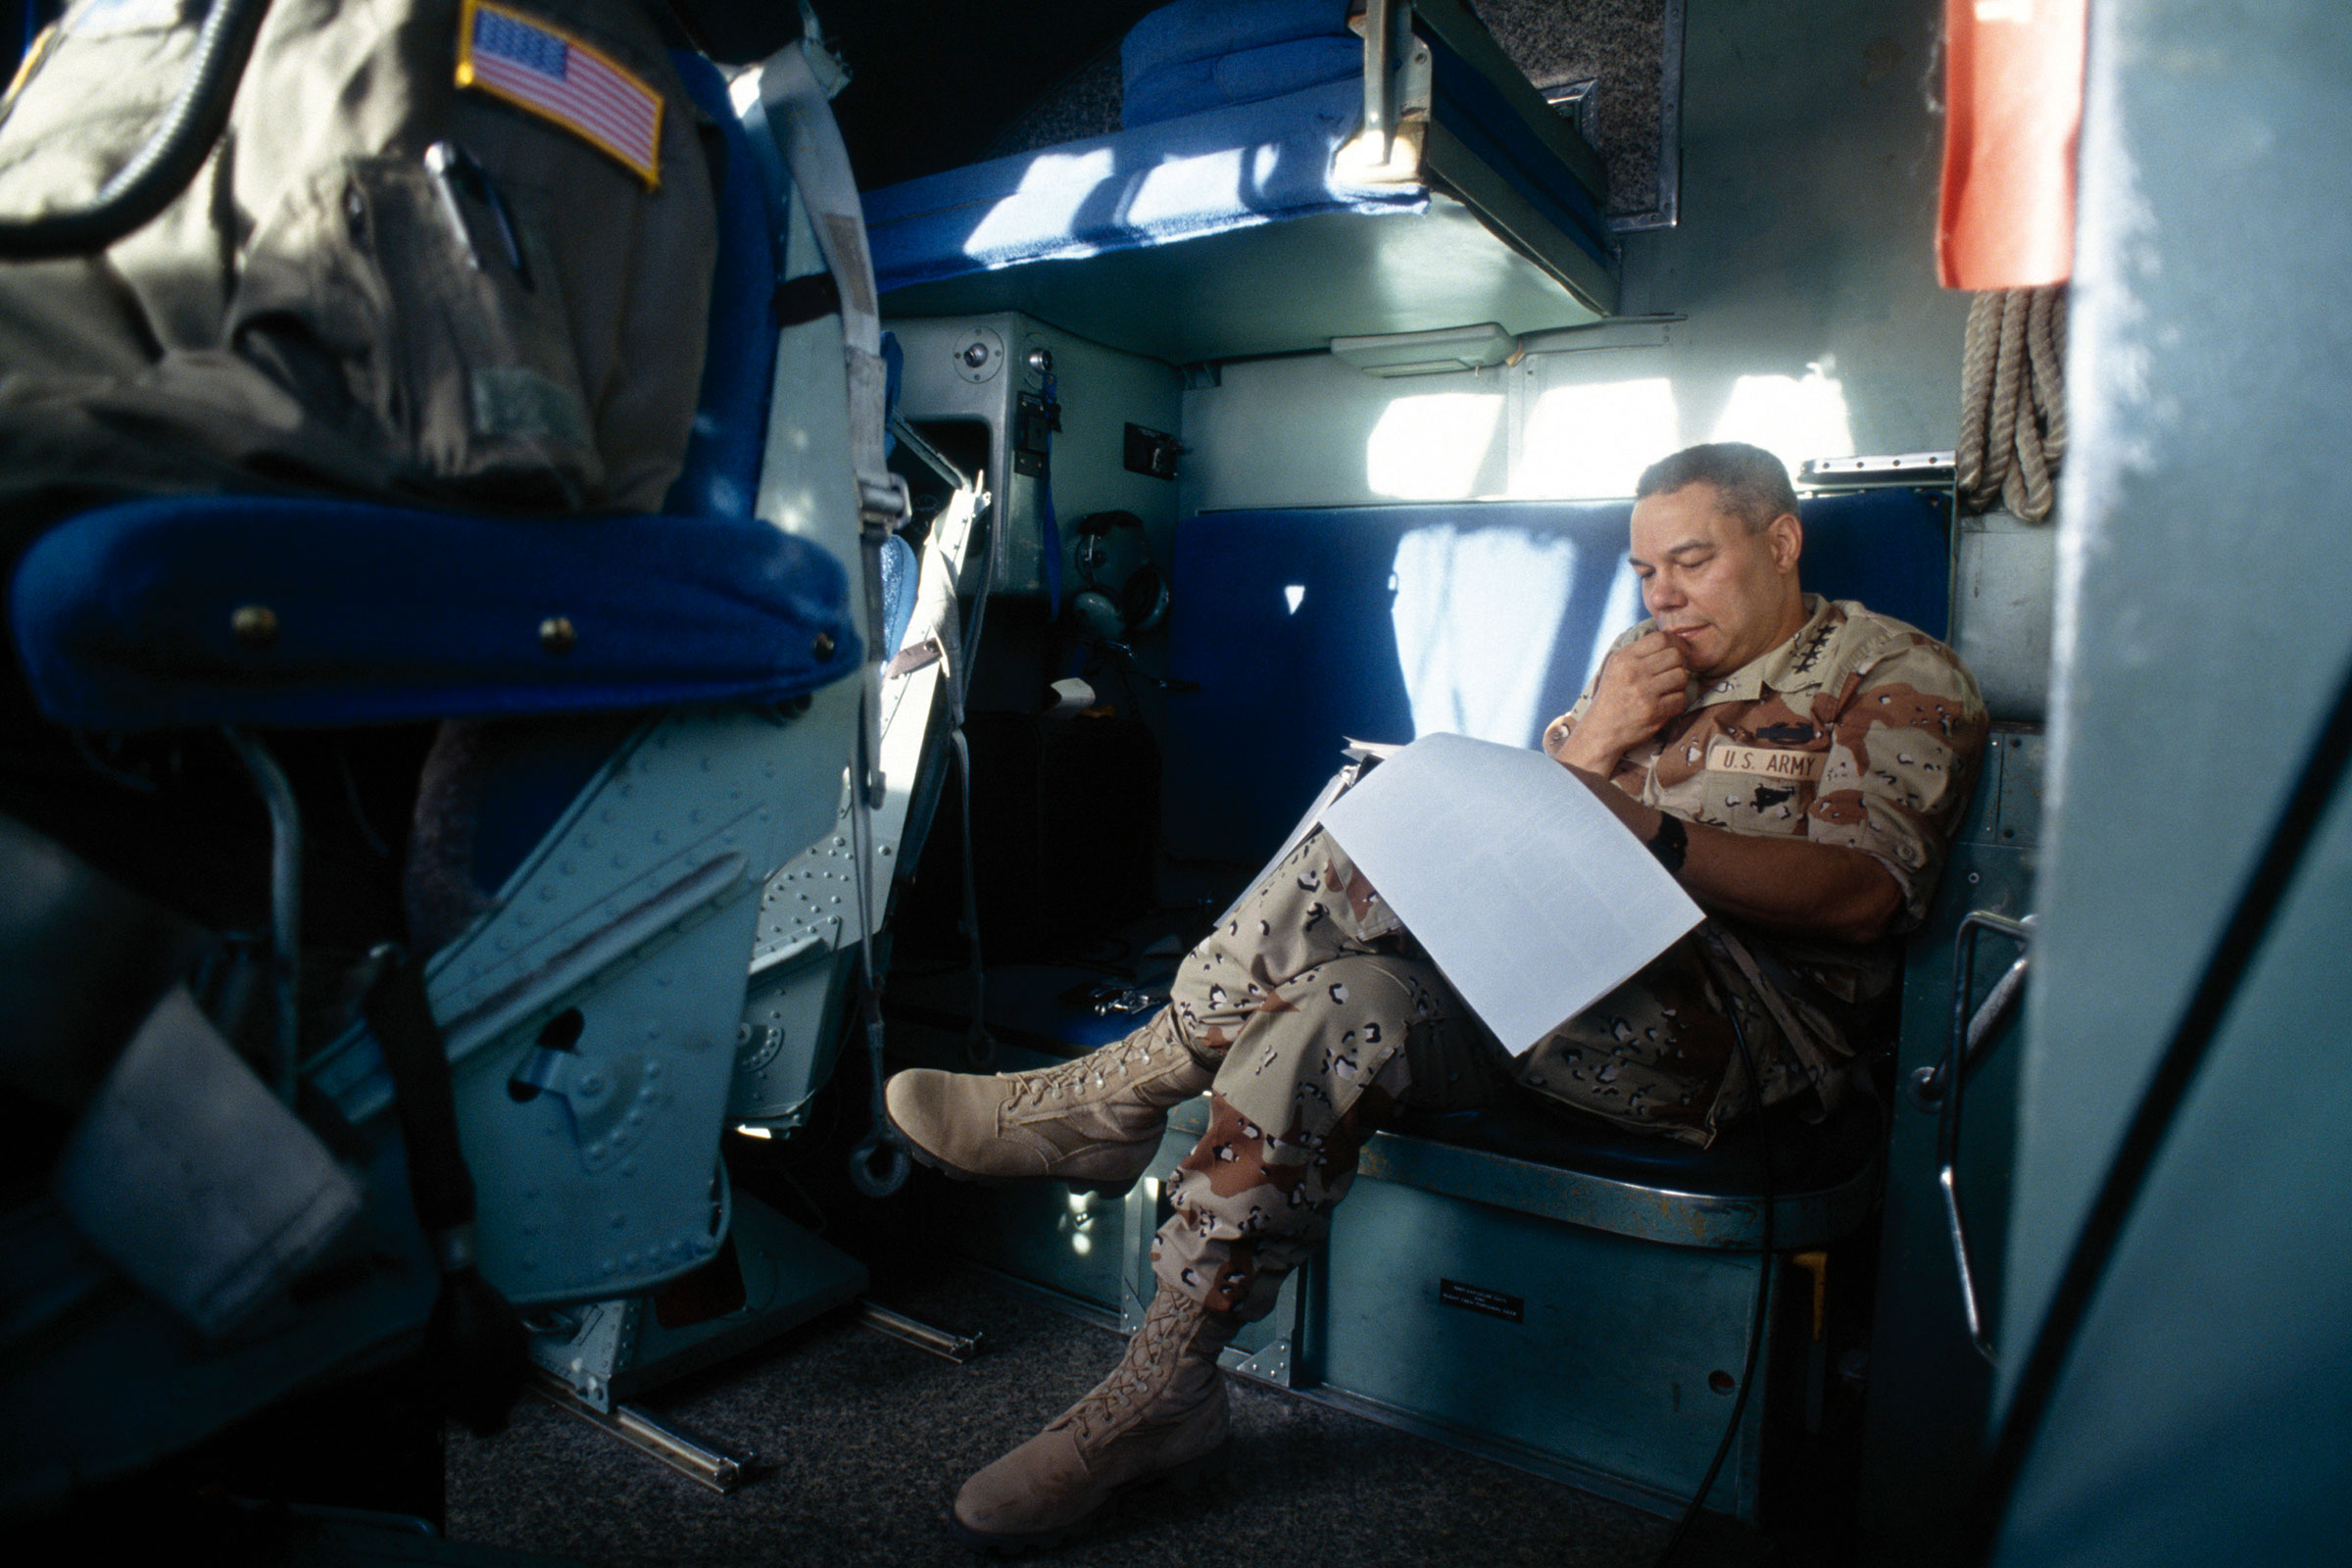 General Colin Powell, Chairman of the Joint Chiefs of Staff, reads during a trip to the USS Wasp, off the coast of Somalia, April 1993. (David Hume Kennerly—Getty Images)